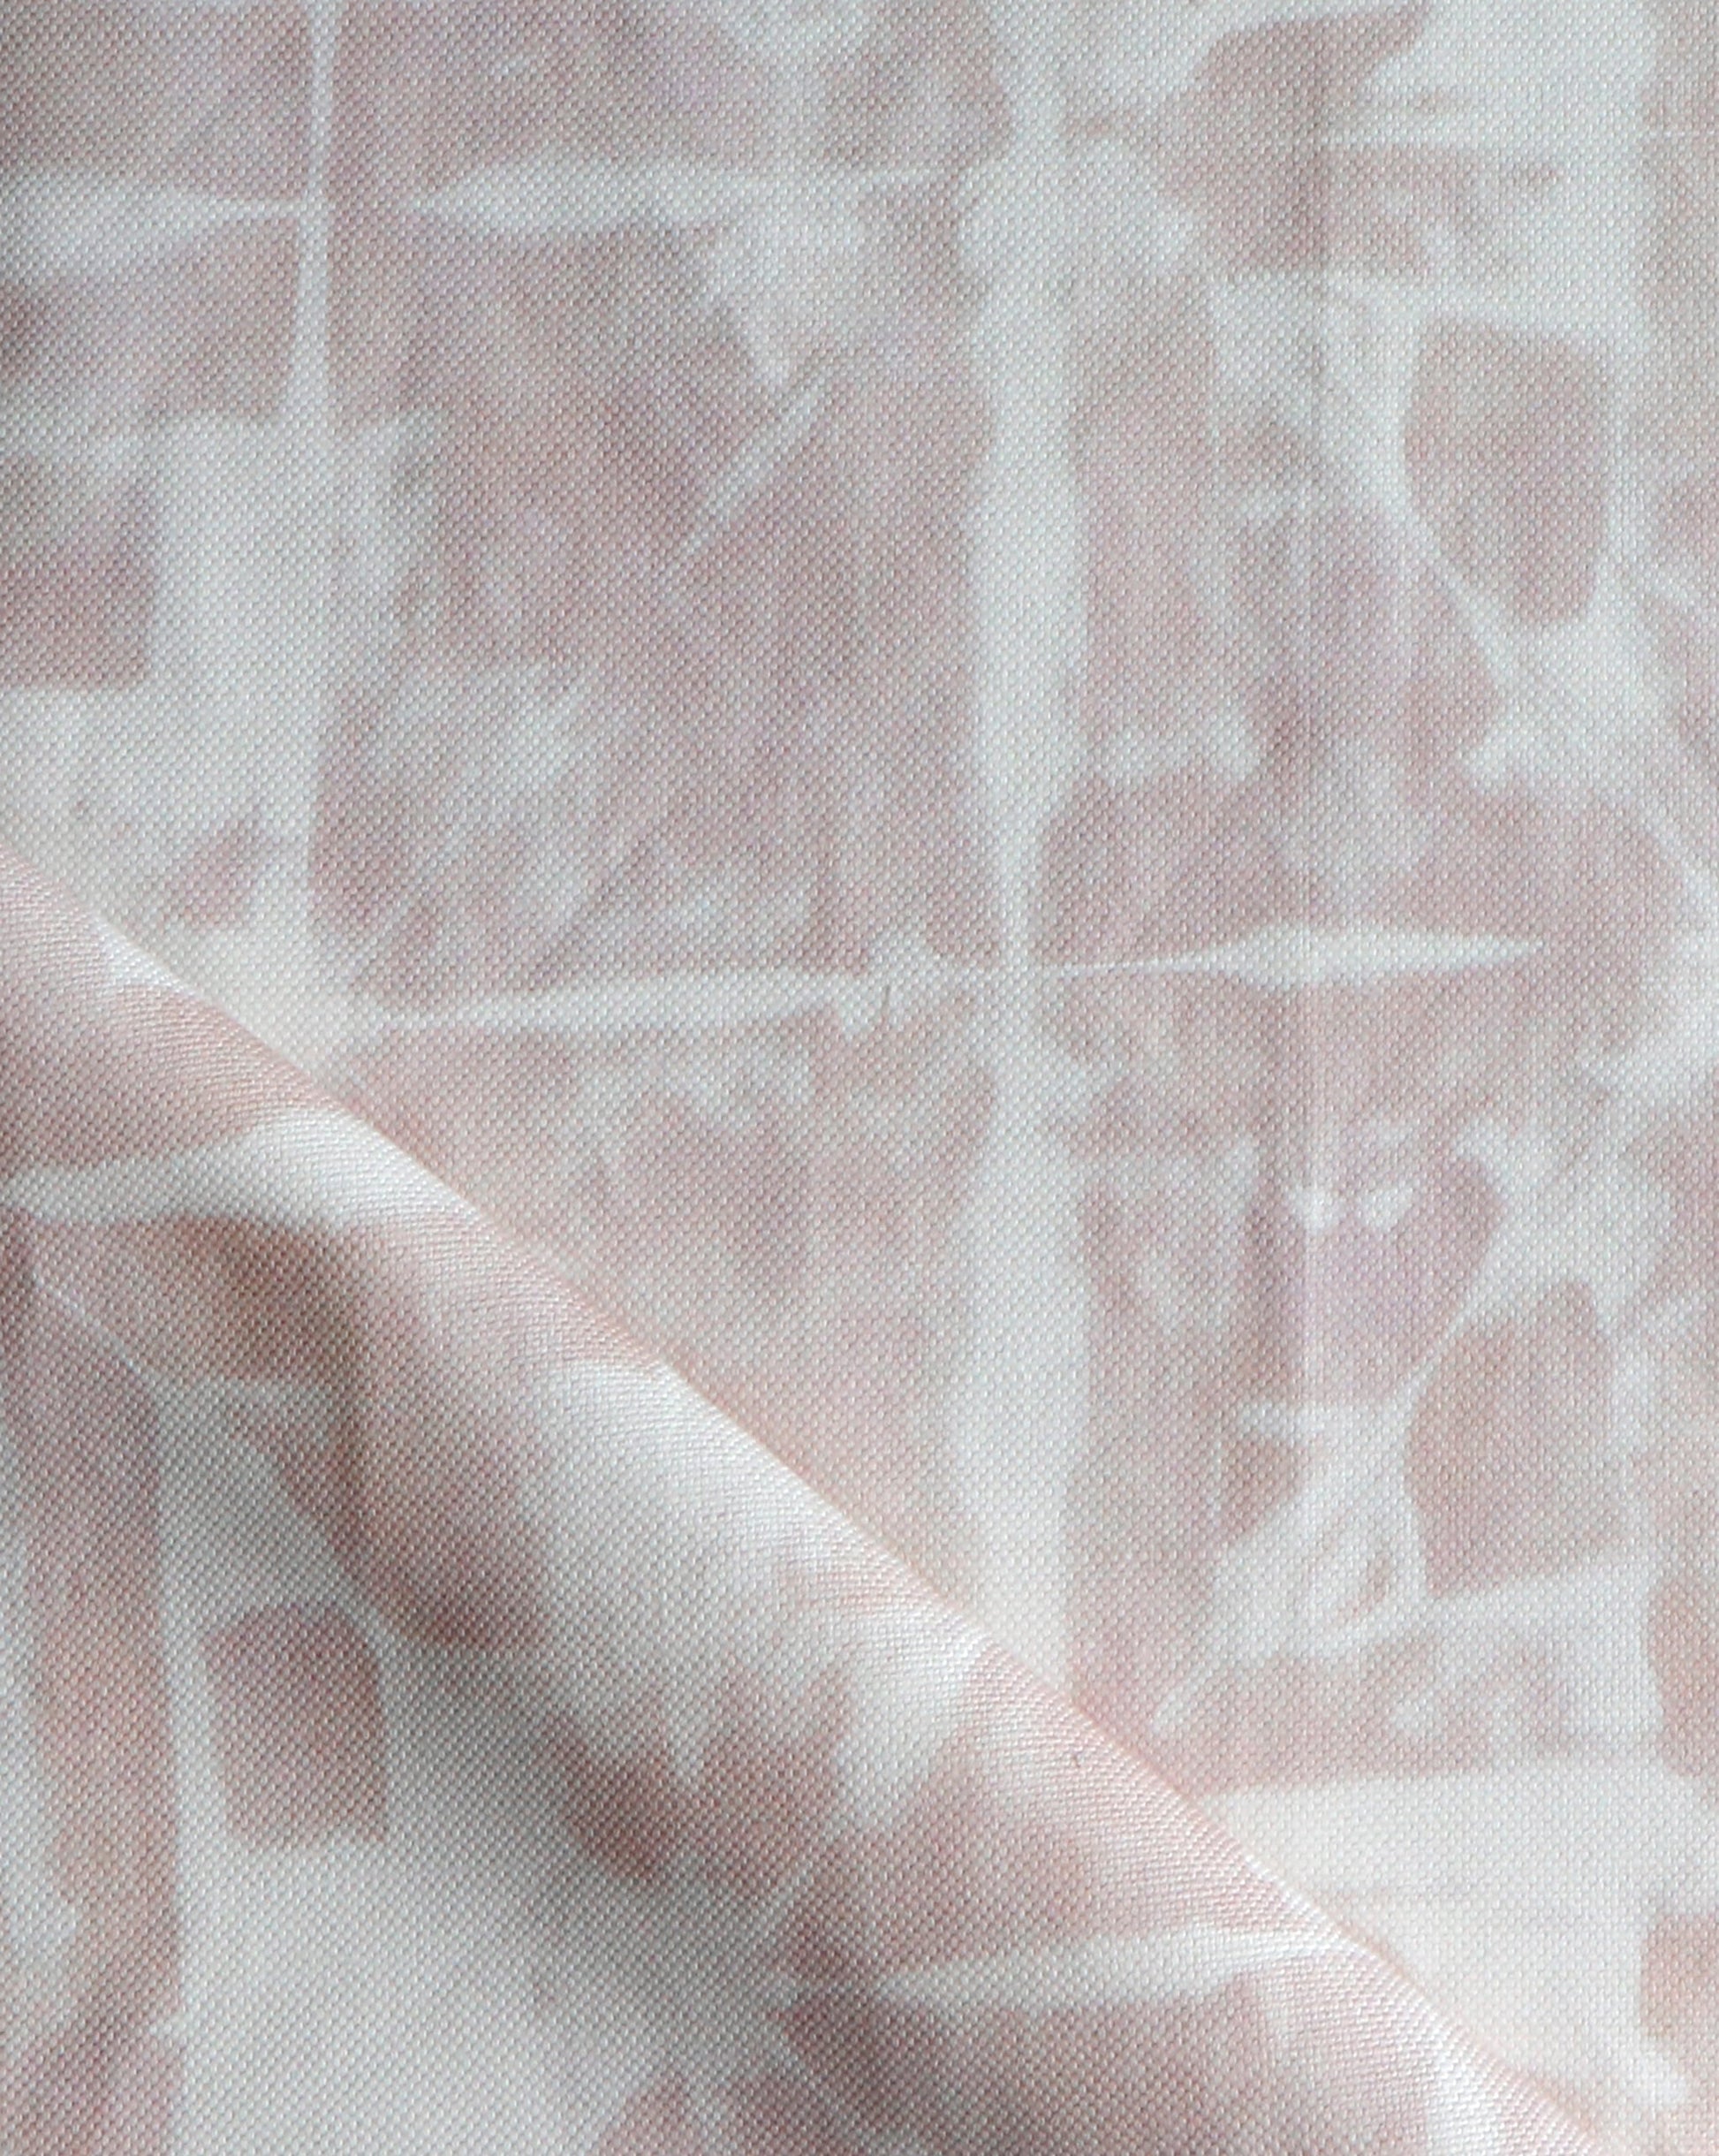 A close up of a pink and white fabric showcasing Banda Fabric Light Peach's tie-dye techniques